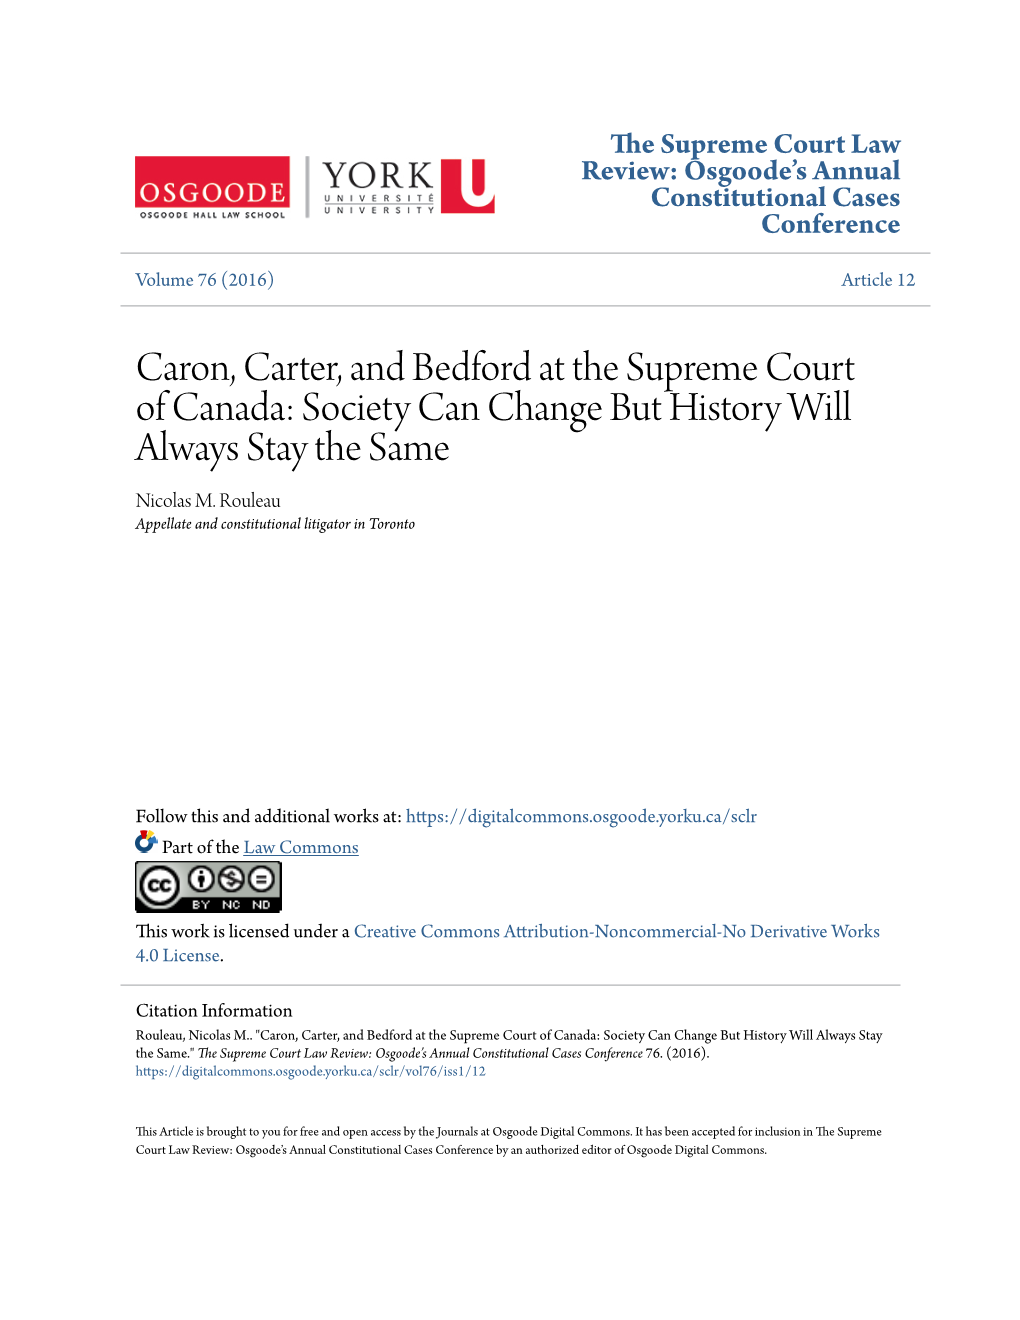 Caron, Carter, and Bedford at the Supreme Court of Canada: Society Can Change but History Will Always Stay the Same Nicolas M